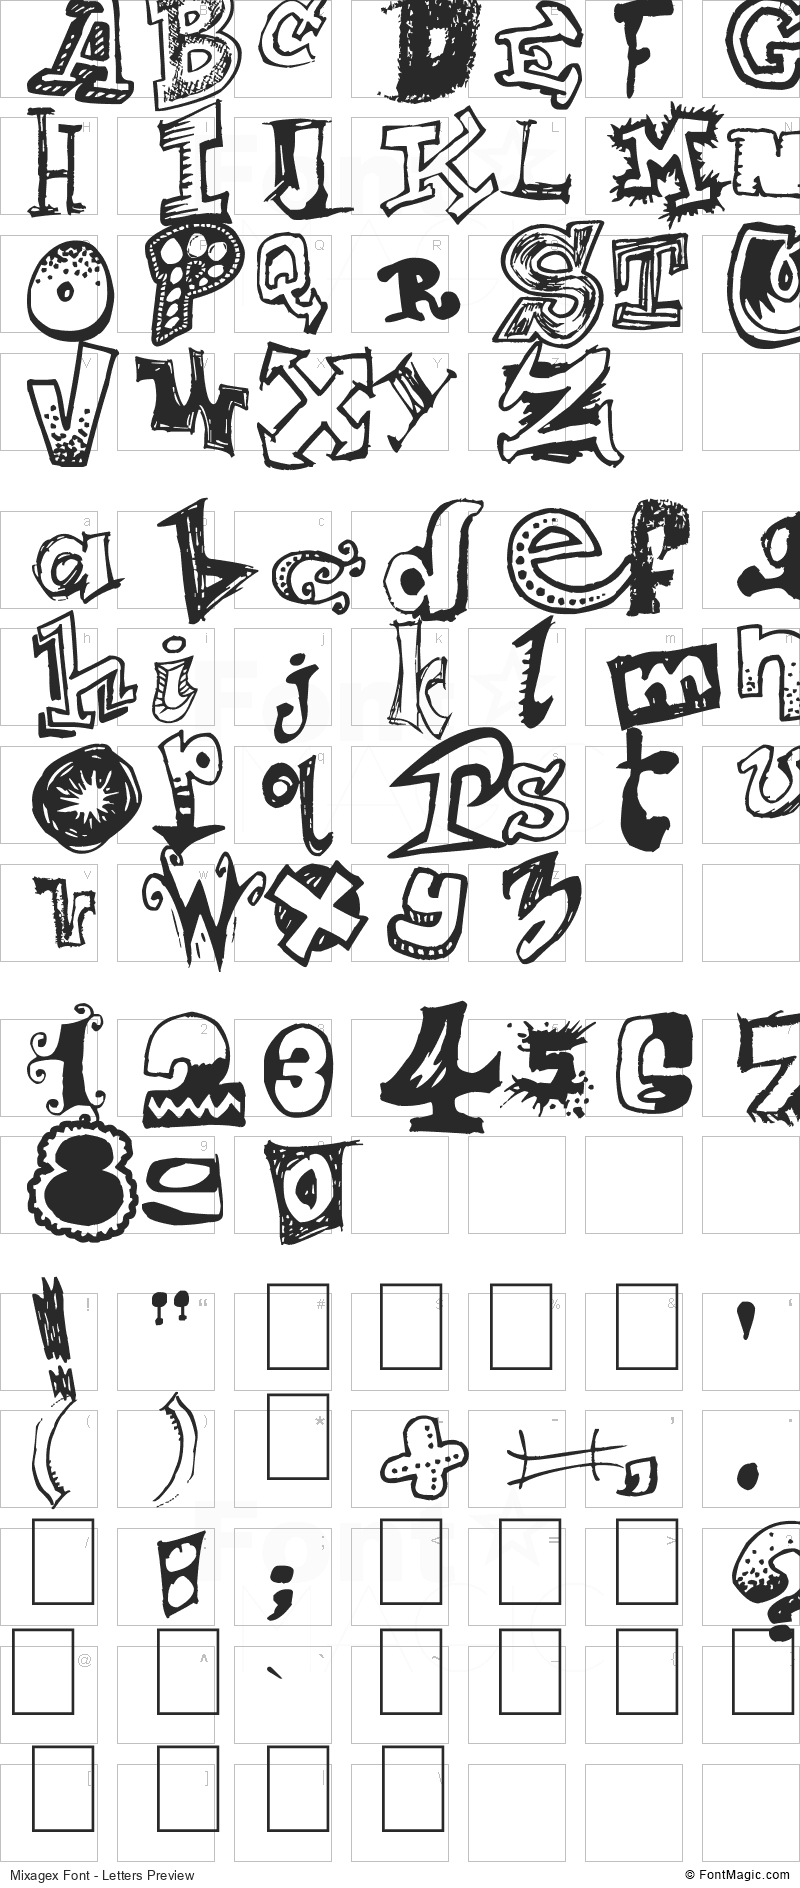 Mixagex Font - All Latters Preview Chart